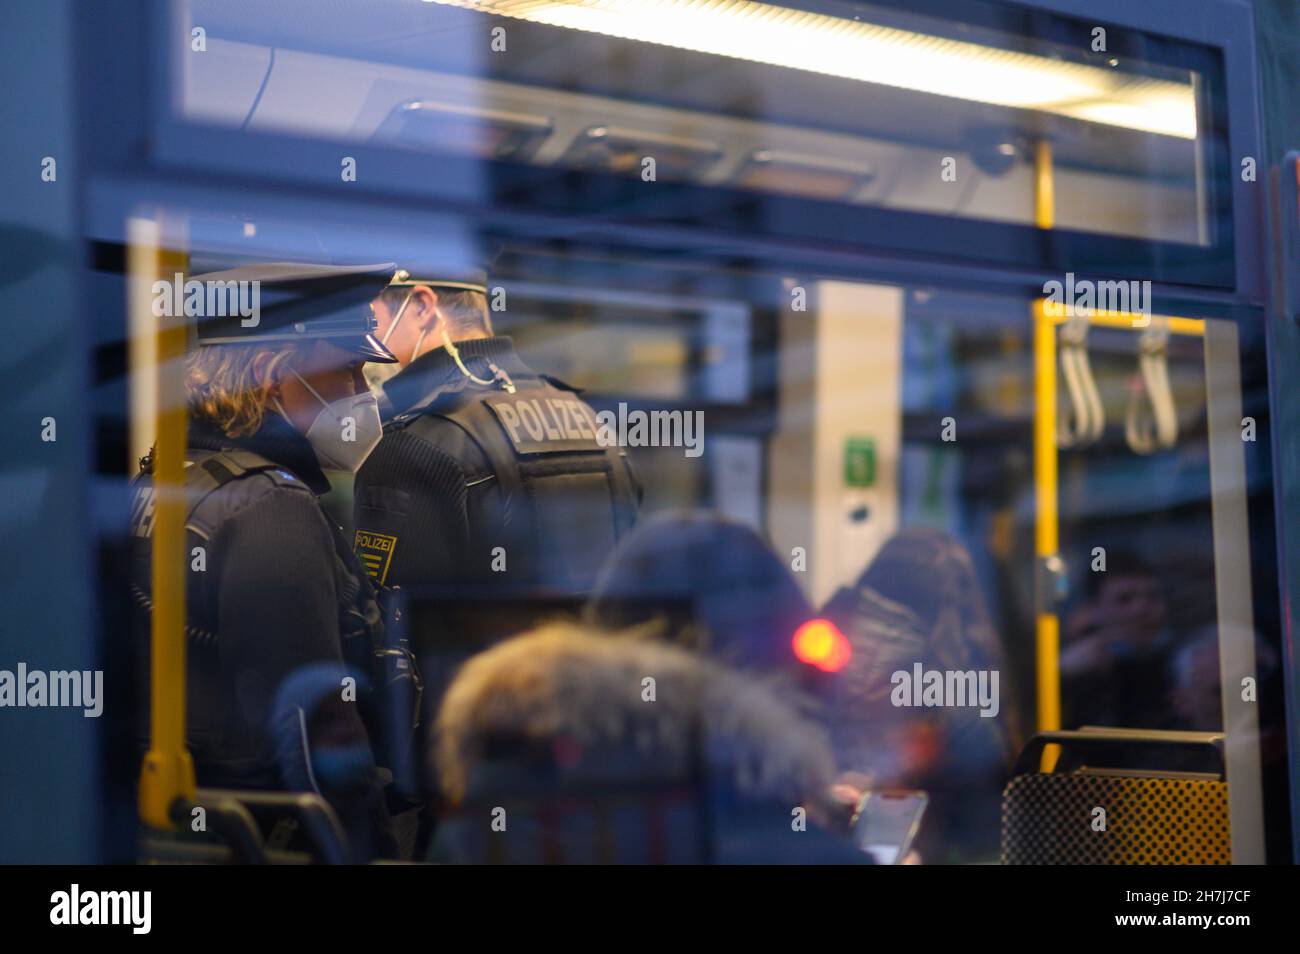 Dresden, Germany. 23rd Nov, 2021. Police officers ride in a DVB tram in Dresden city centre. The Dresden police department is monitoring compliance with the new Corona rules on a daily basis with 50 officers. Accordingly, the focus is on controls of the FFP2 mask obligation in public transport as well as the exit restrictions for unvaccinated persons in hotspot areas. Credit: Robert Michael/dpa-Zentralbild/dpa/Alamy Live News Stock Photo